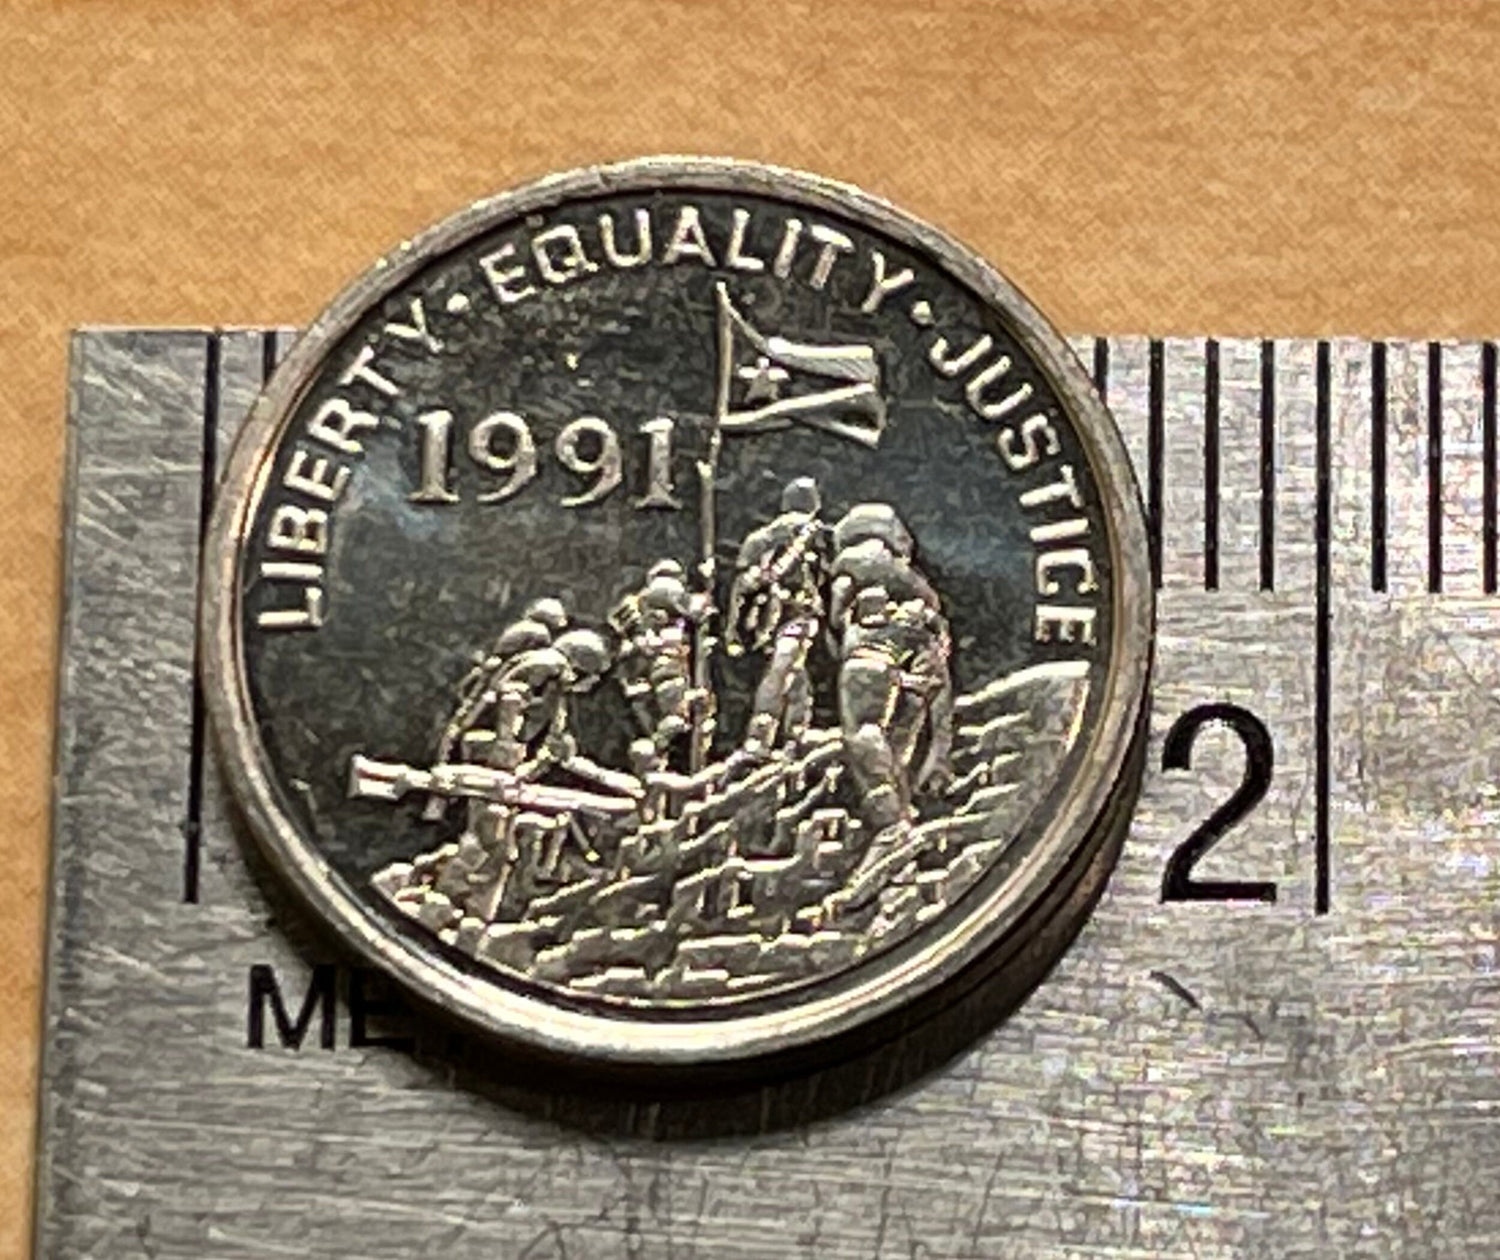 Red-Fronted Gazelle & Liberty Equality Justice Penny Eritrea Authentic Coin Money for Jewelry and Craft Making